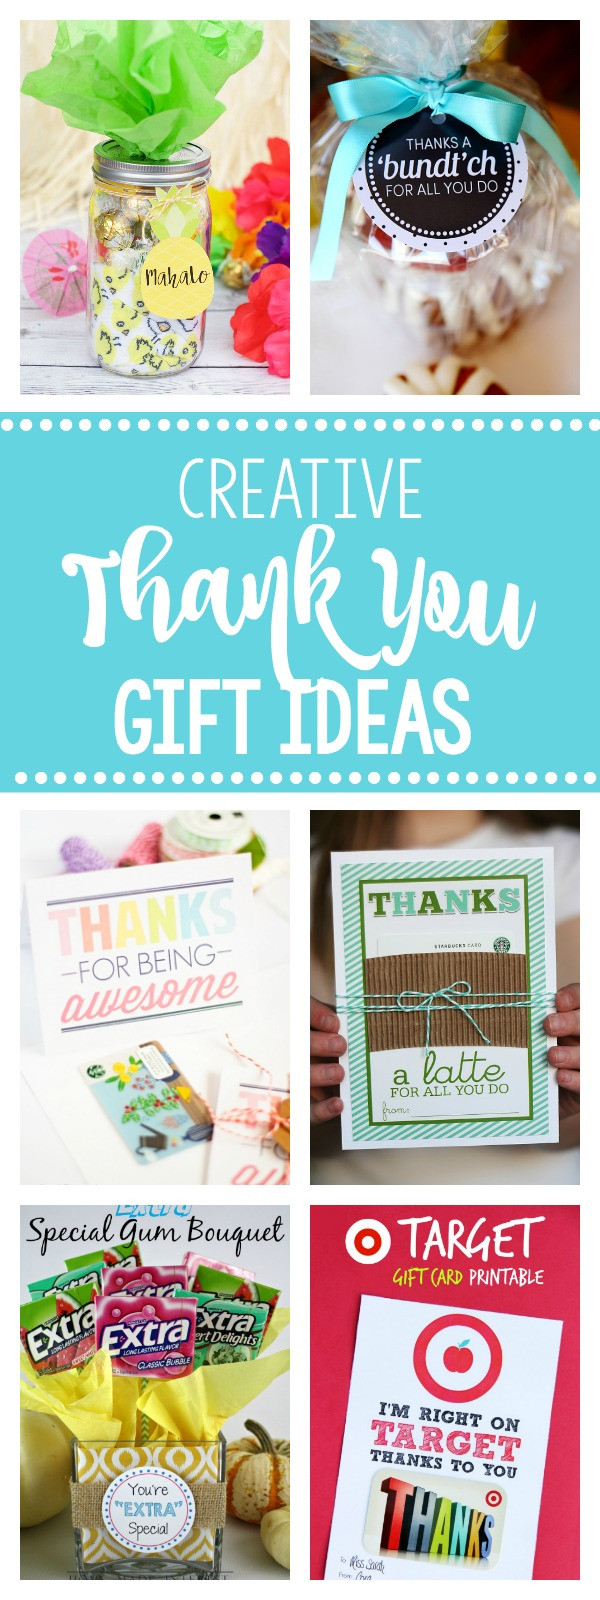 Thank You Gift Ideas For Coworker
 25 Creative & Unique Thank You Gifts – Fun Squared